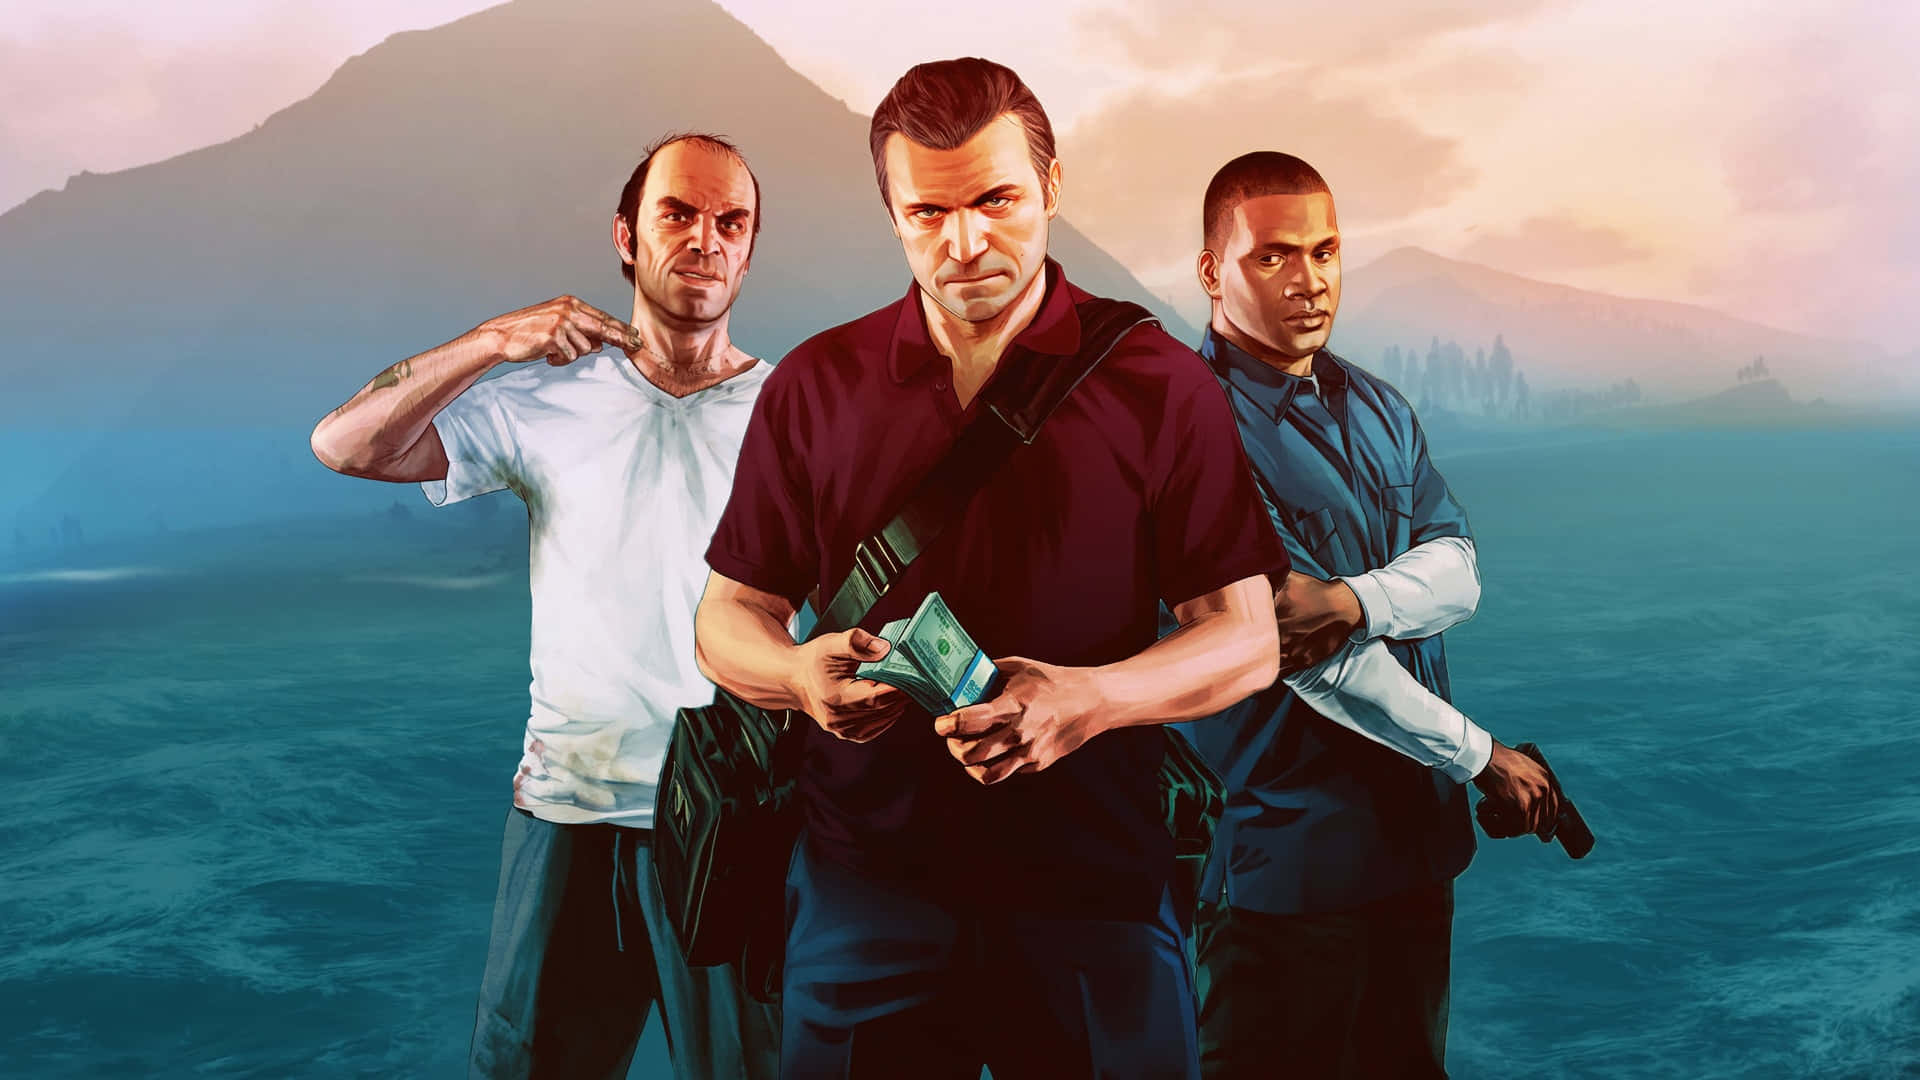 Live Life in High Resolution With GTA V 4K" Wallpaper